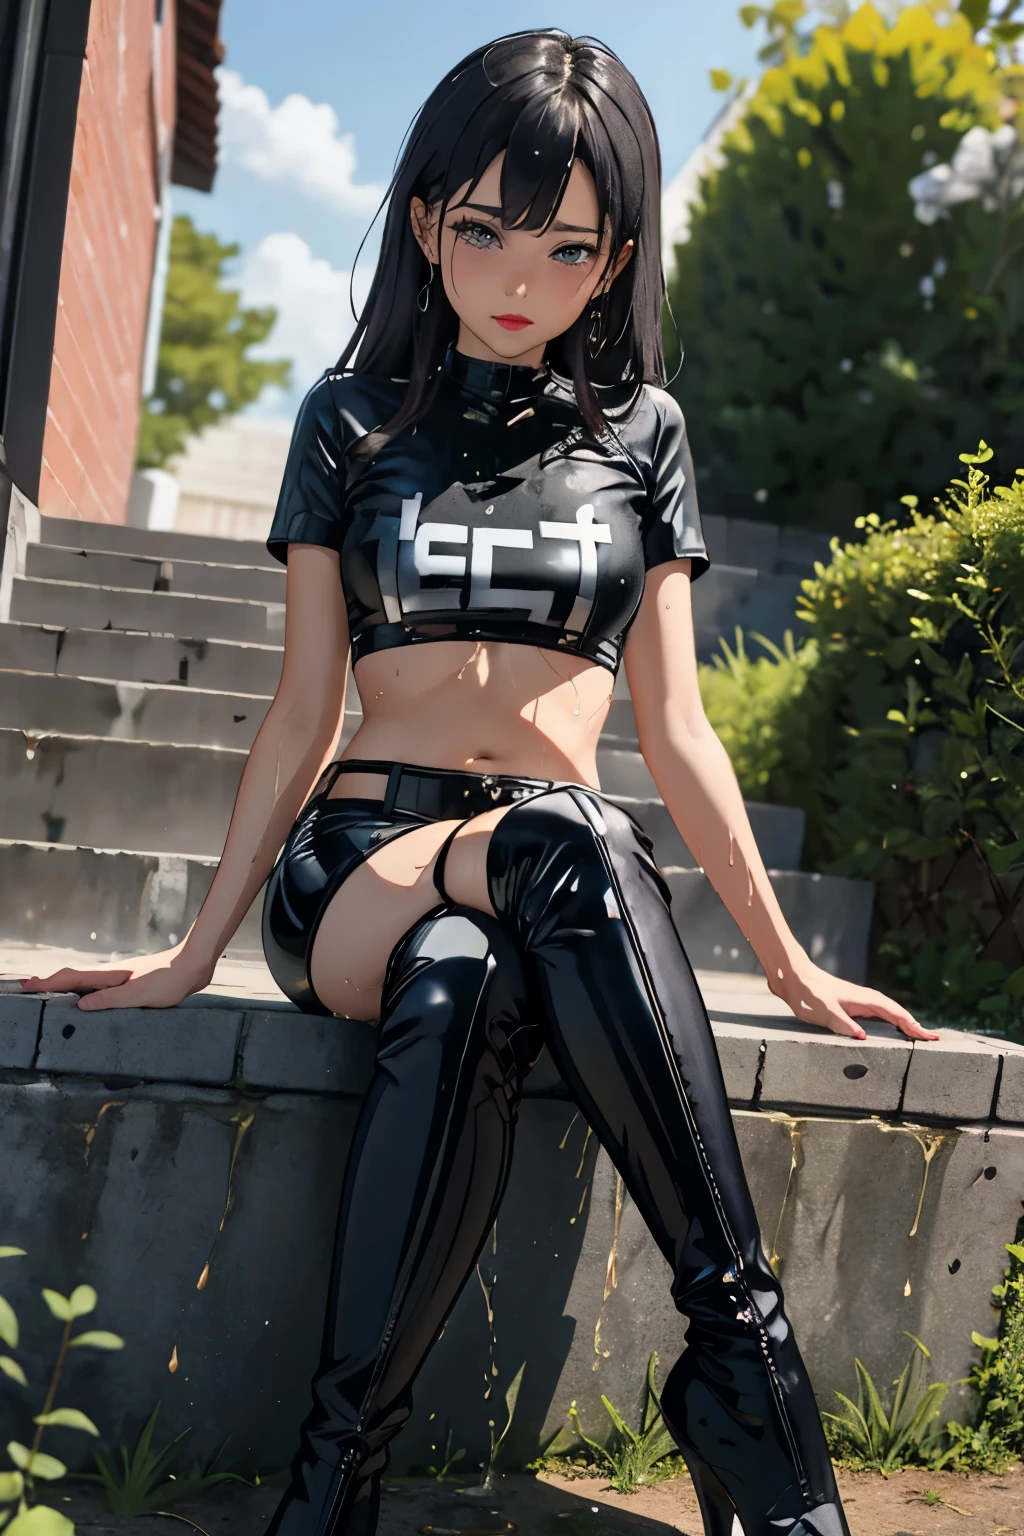 anime, best quality, high quality, highres, beautiful women, high detail, good lighting, lewd, hentai, (no nudity), ((((bike shorts)))), ((tight leather top)), ((((leather thigh high boots)))), bare midriff, (wet shorts), (((wetting herself))), (((peeing herself))), (((peeing self))), (pee streaming down legs), peeing stain, (puddle), (thick thighs), nice long legs, lipstick, detailed face, pretty face, pretty hands, embarrassed blushing face, humiliated, (((outdoors))), (((sitting legs crossed))), hihelz